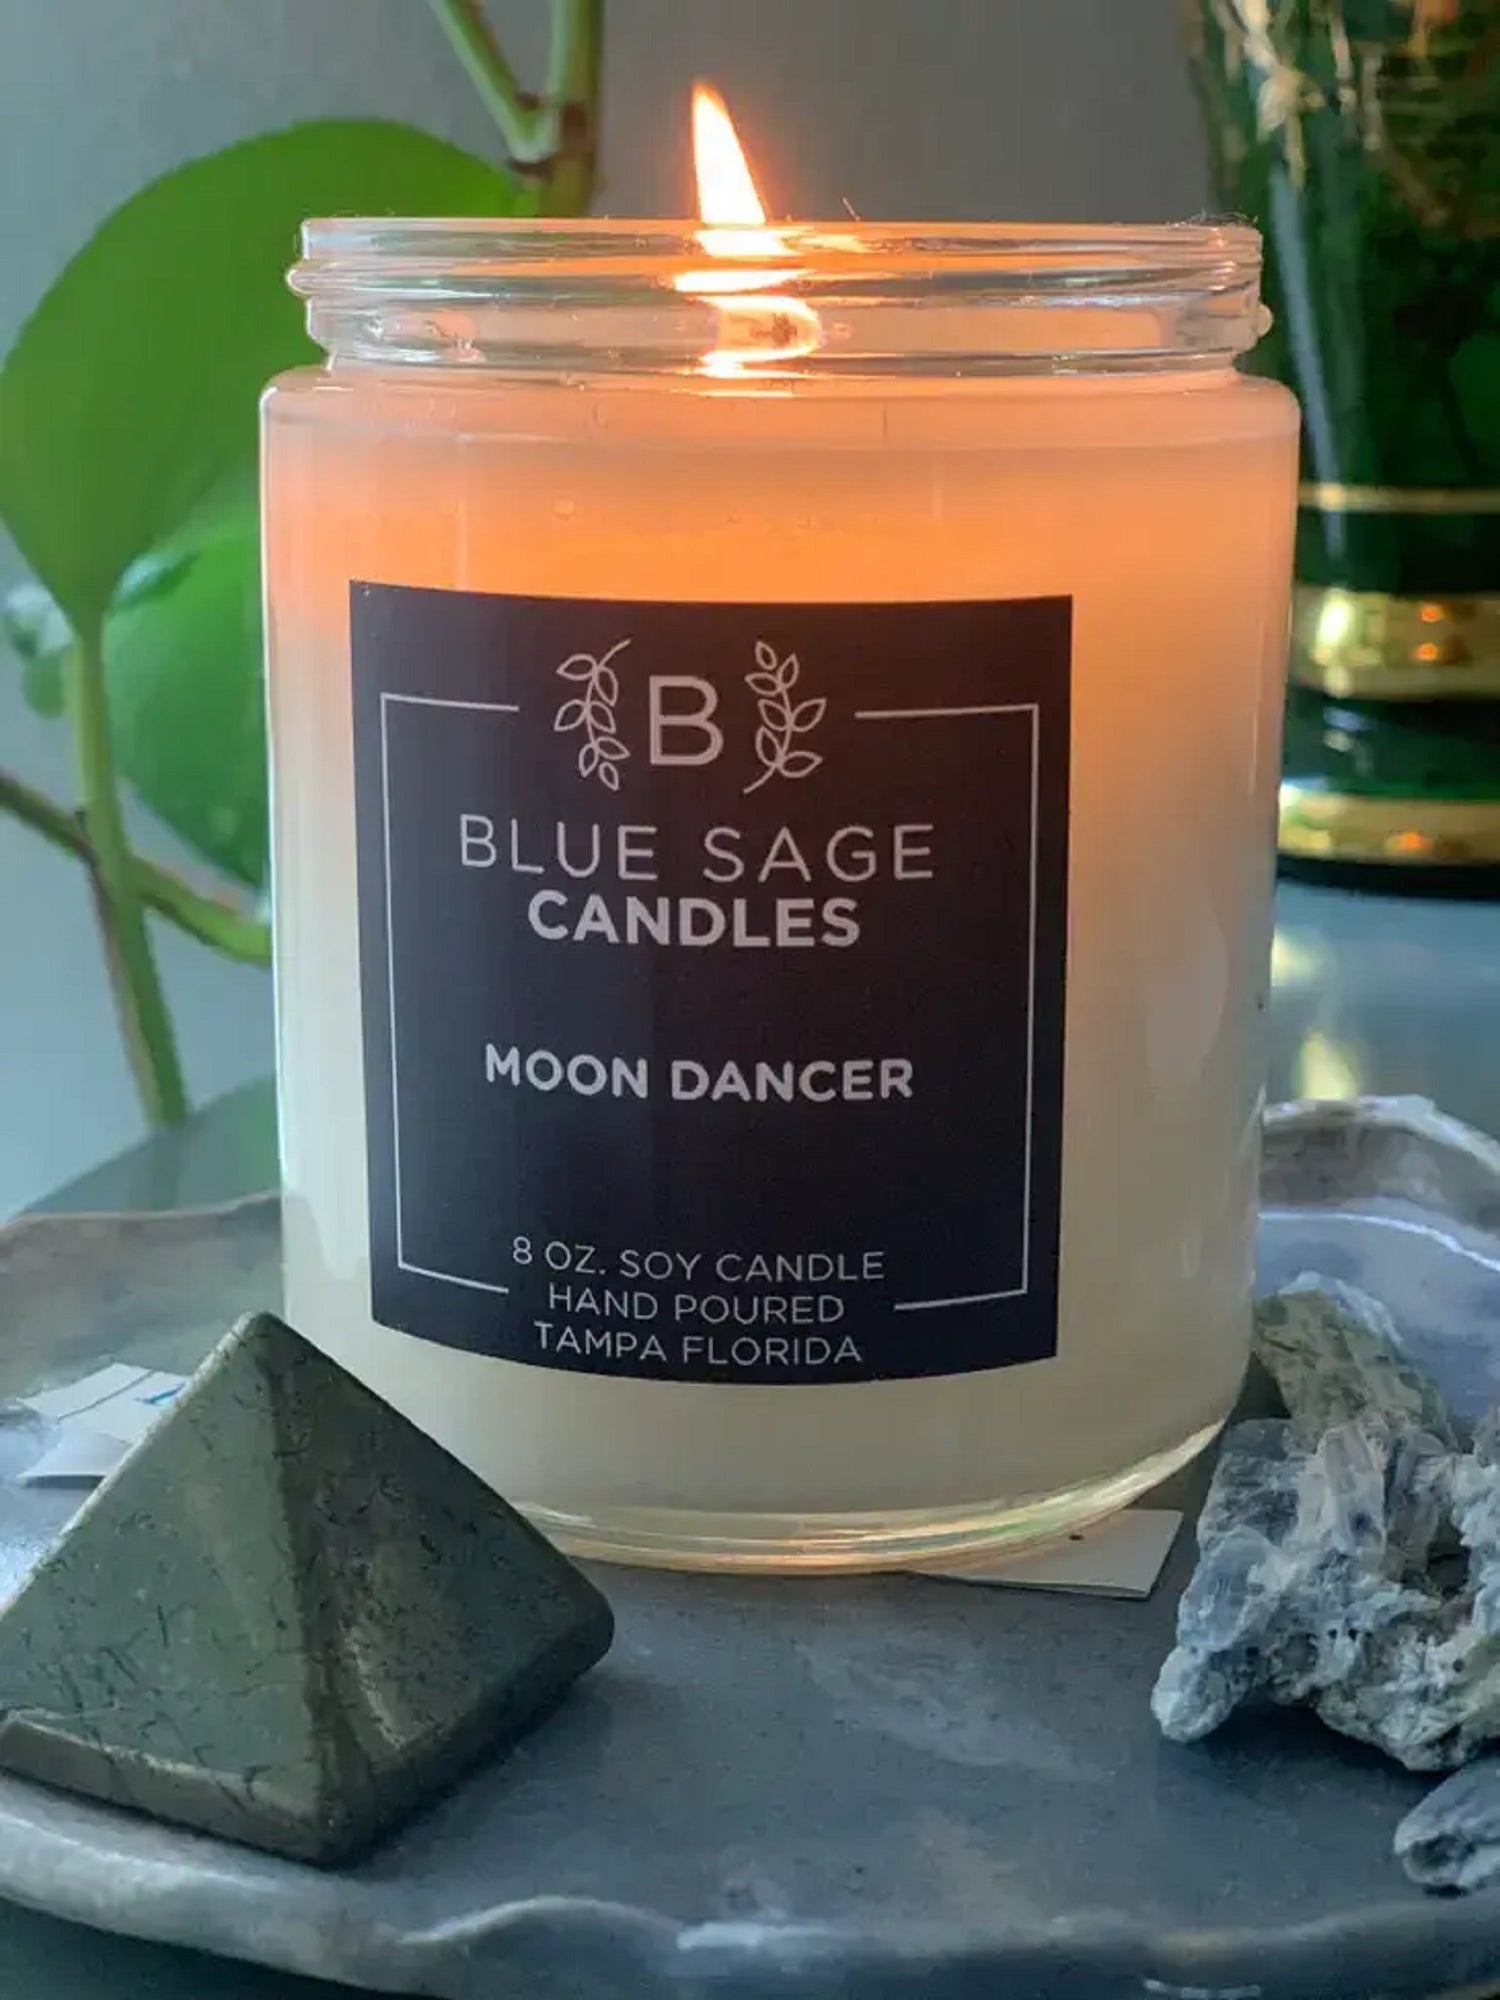 Blue Sage Candles - Moon Dancer Scented Soy Wax Candle